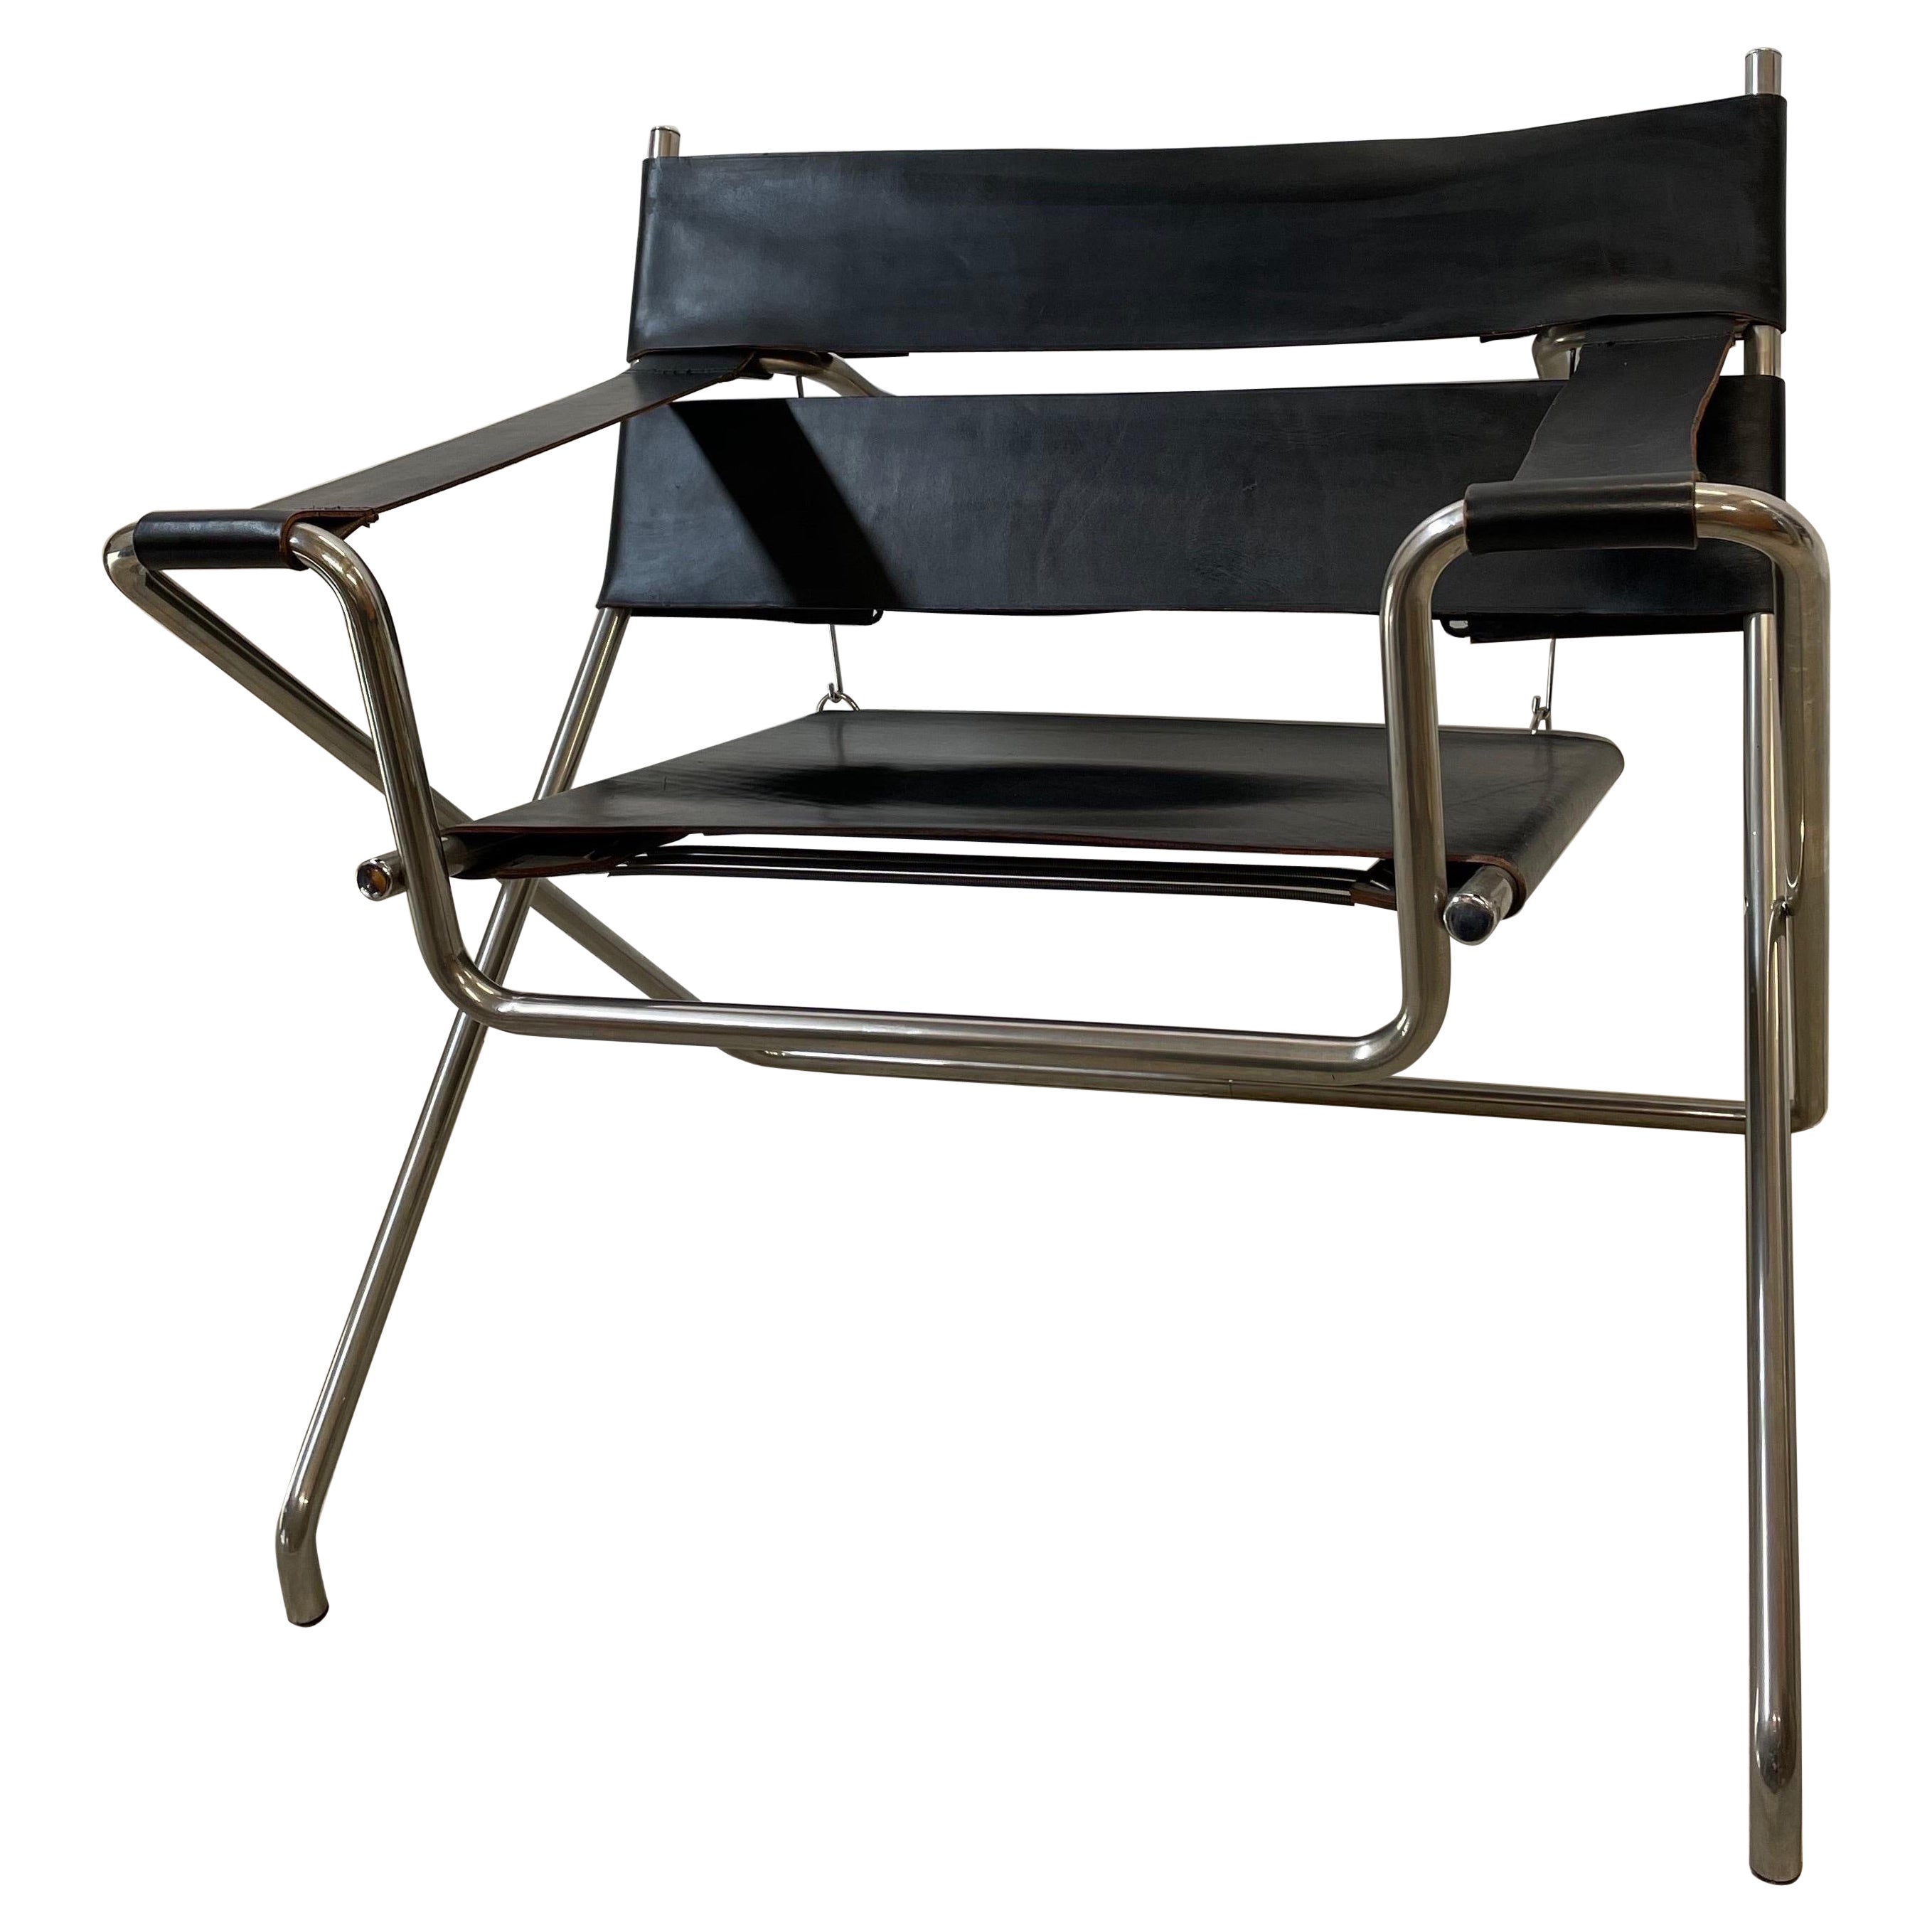 D4 Foldingchair by Marcel Breuer for Tecta in Black Leather -1980